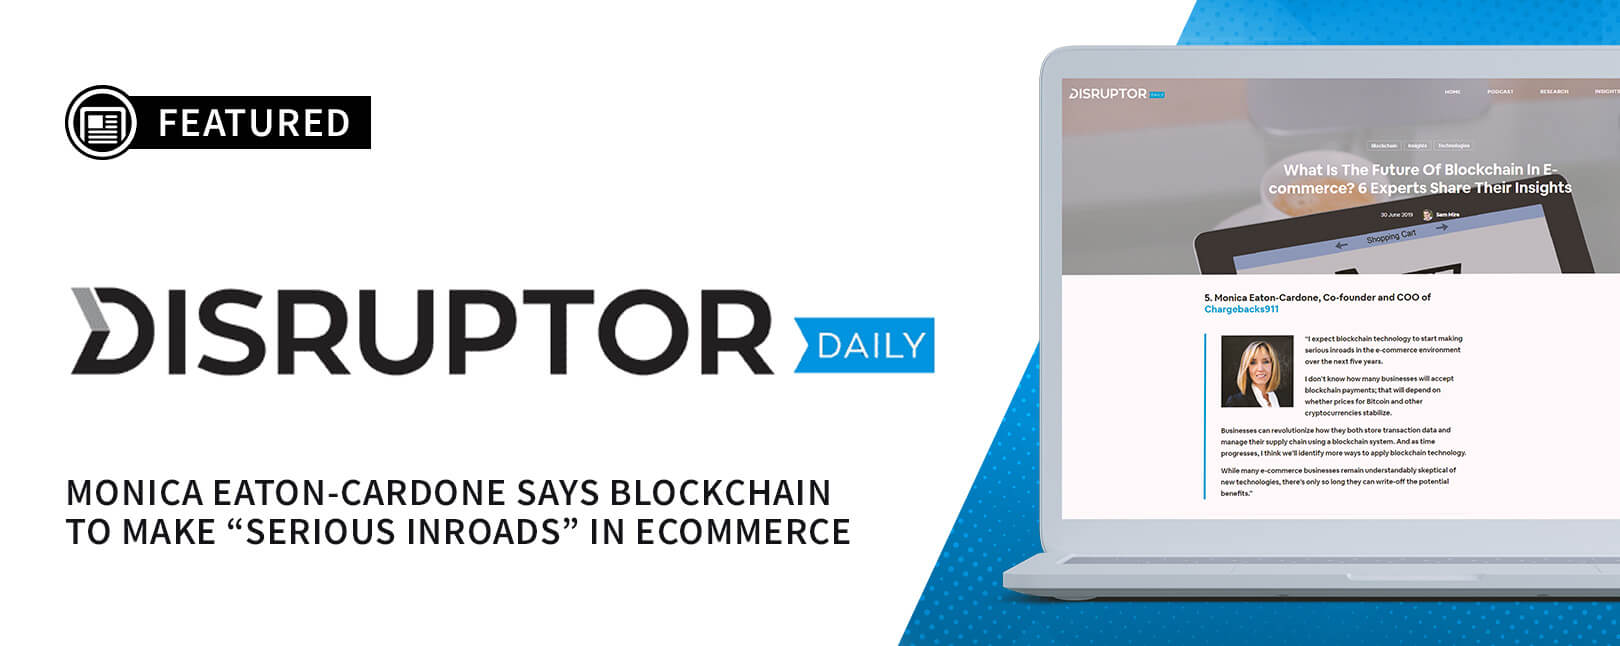 Chargebacks911® COO Comments on Blockchain’s Future for Disruptor Daily